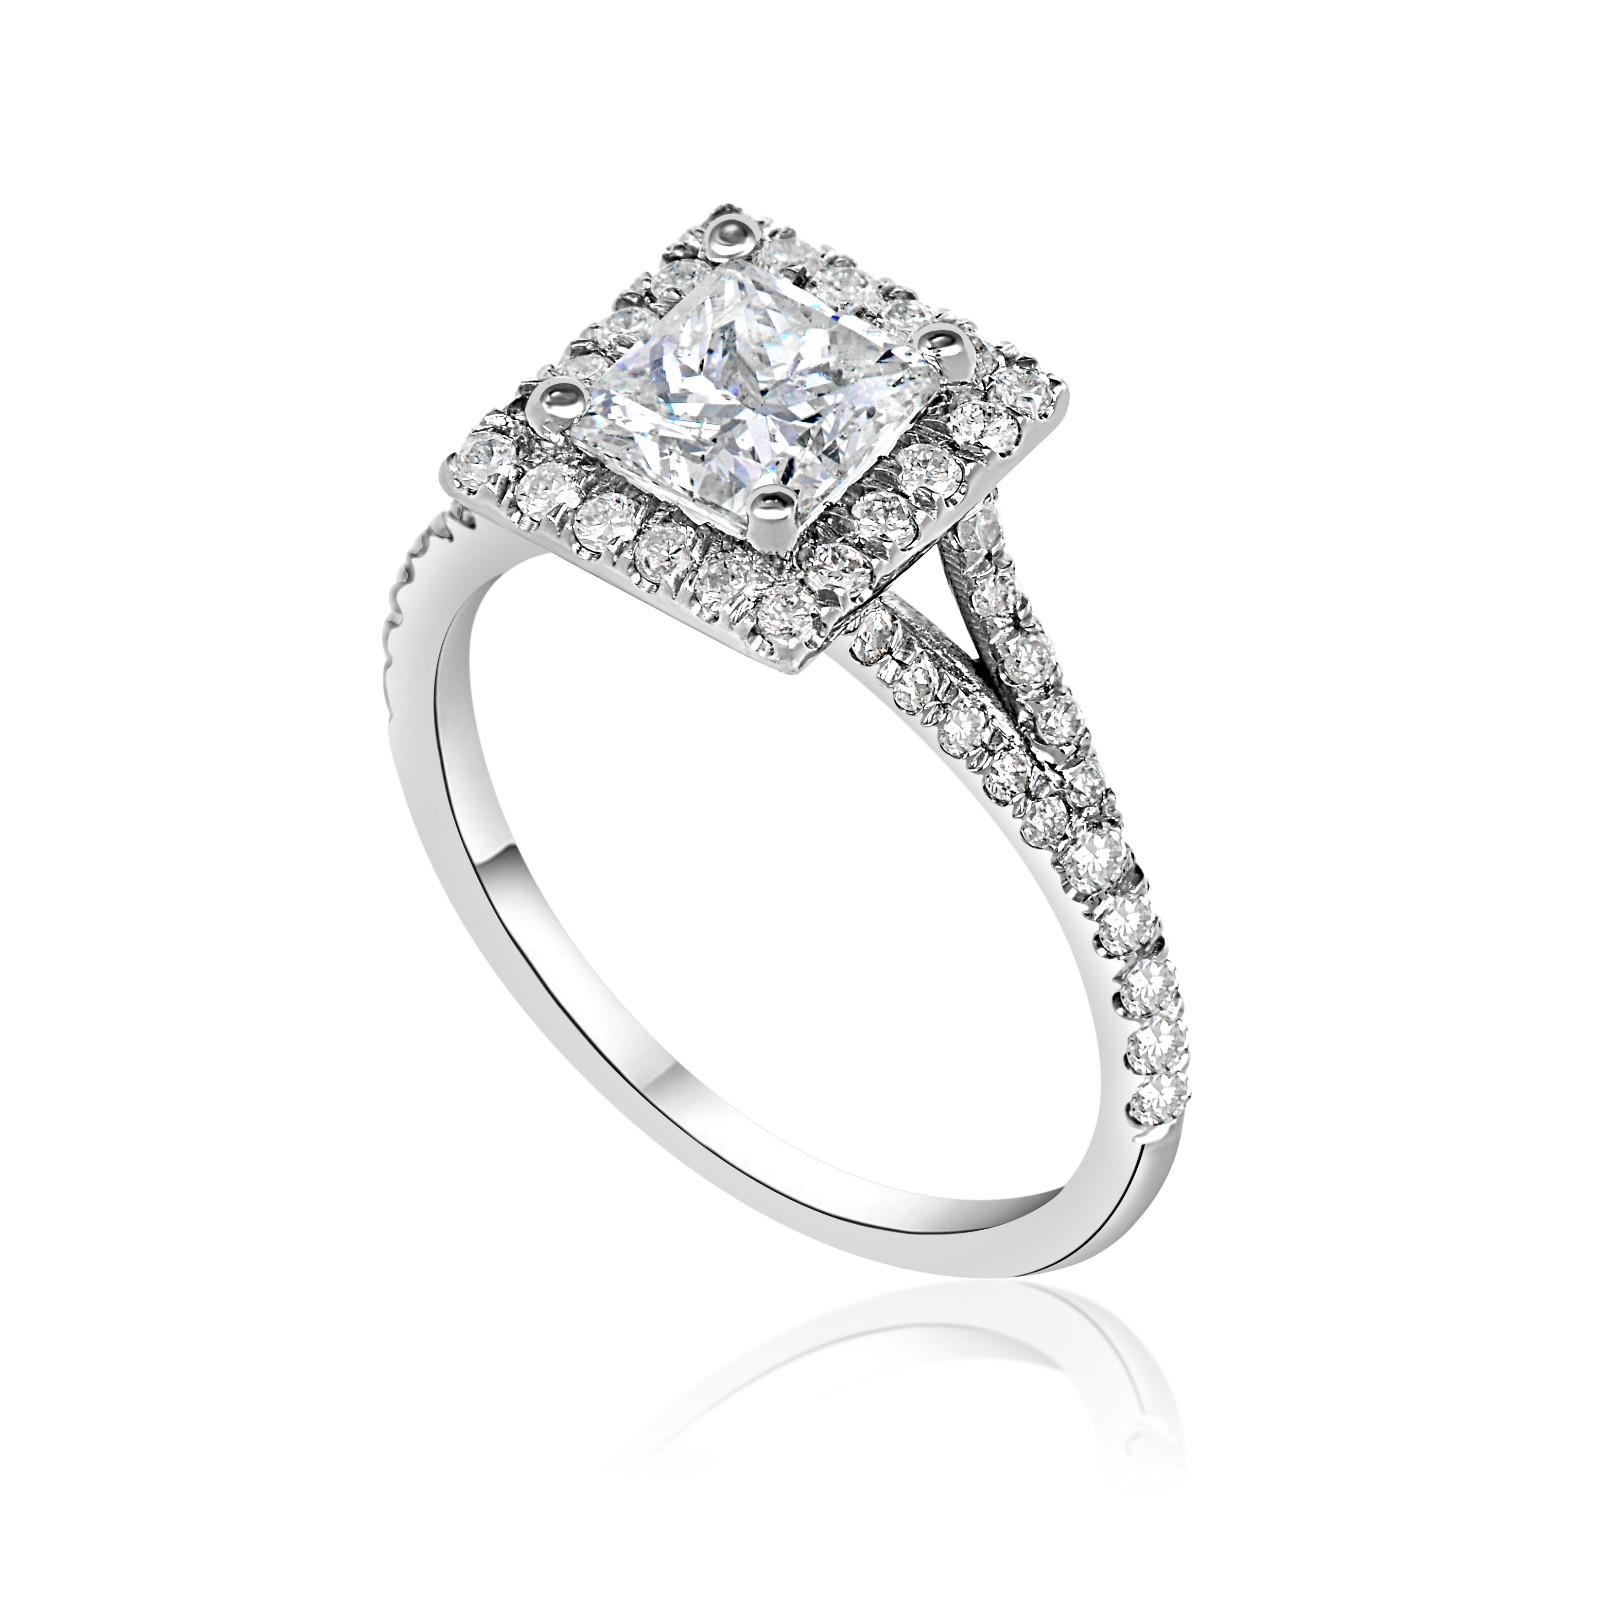 2 ct SI1 Princess Cut Diamond Solitaire Engagement Ring 